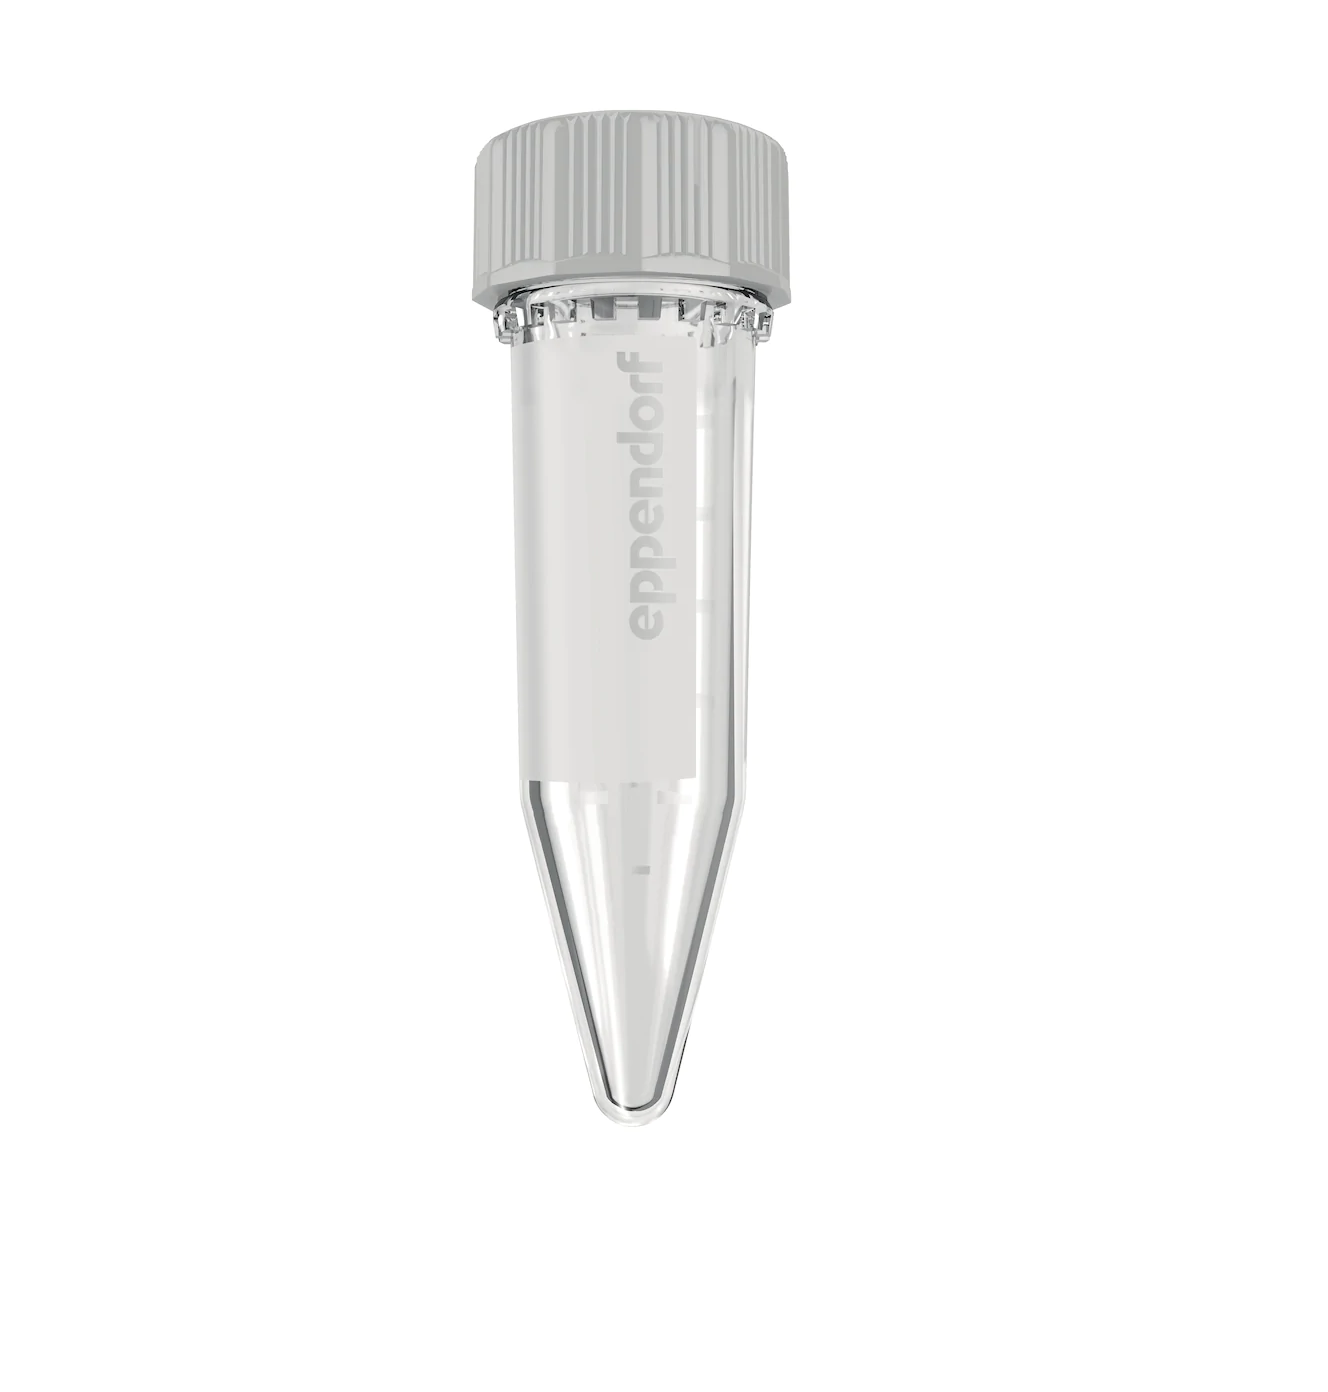 Eppendorf Tubes® 5.0 mL with screw cap, 5.0 mL, sterile, pyrogen-, DNase-, RNase-, human and bacterial DNA-free, colorless, 200 tubes (2 bags × 100 tubes)